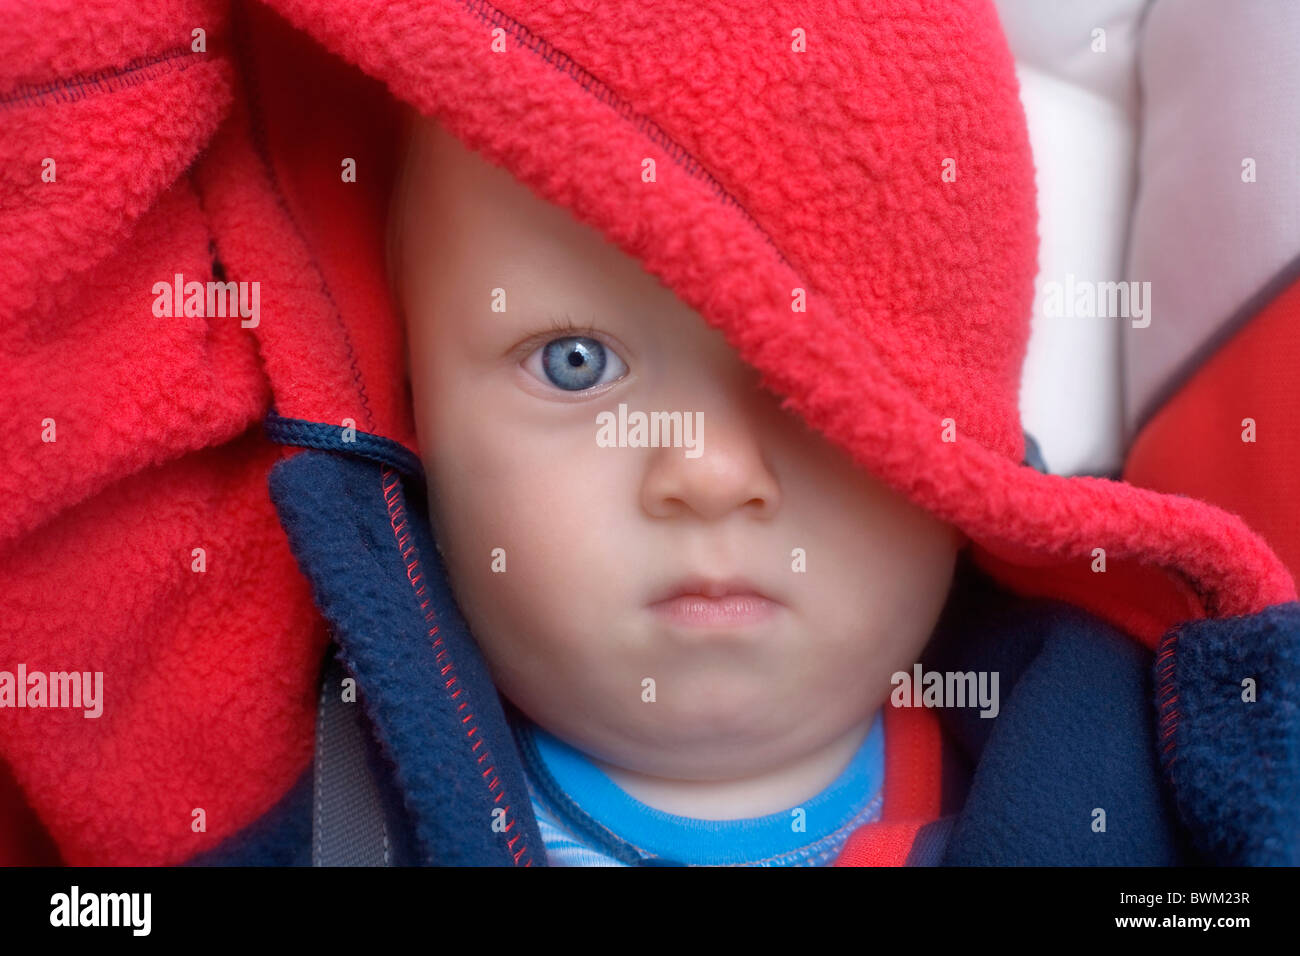 Baby boy 11 Months old toddler portrait child children hood red blue clothing one person Stock Photo